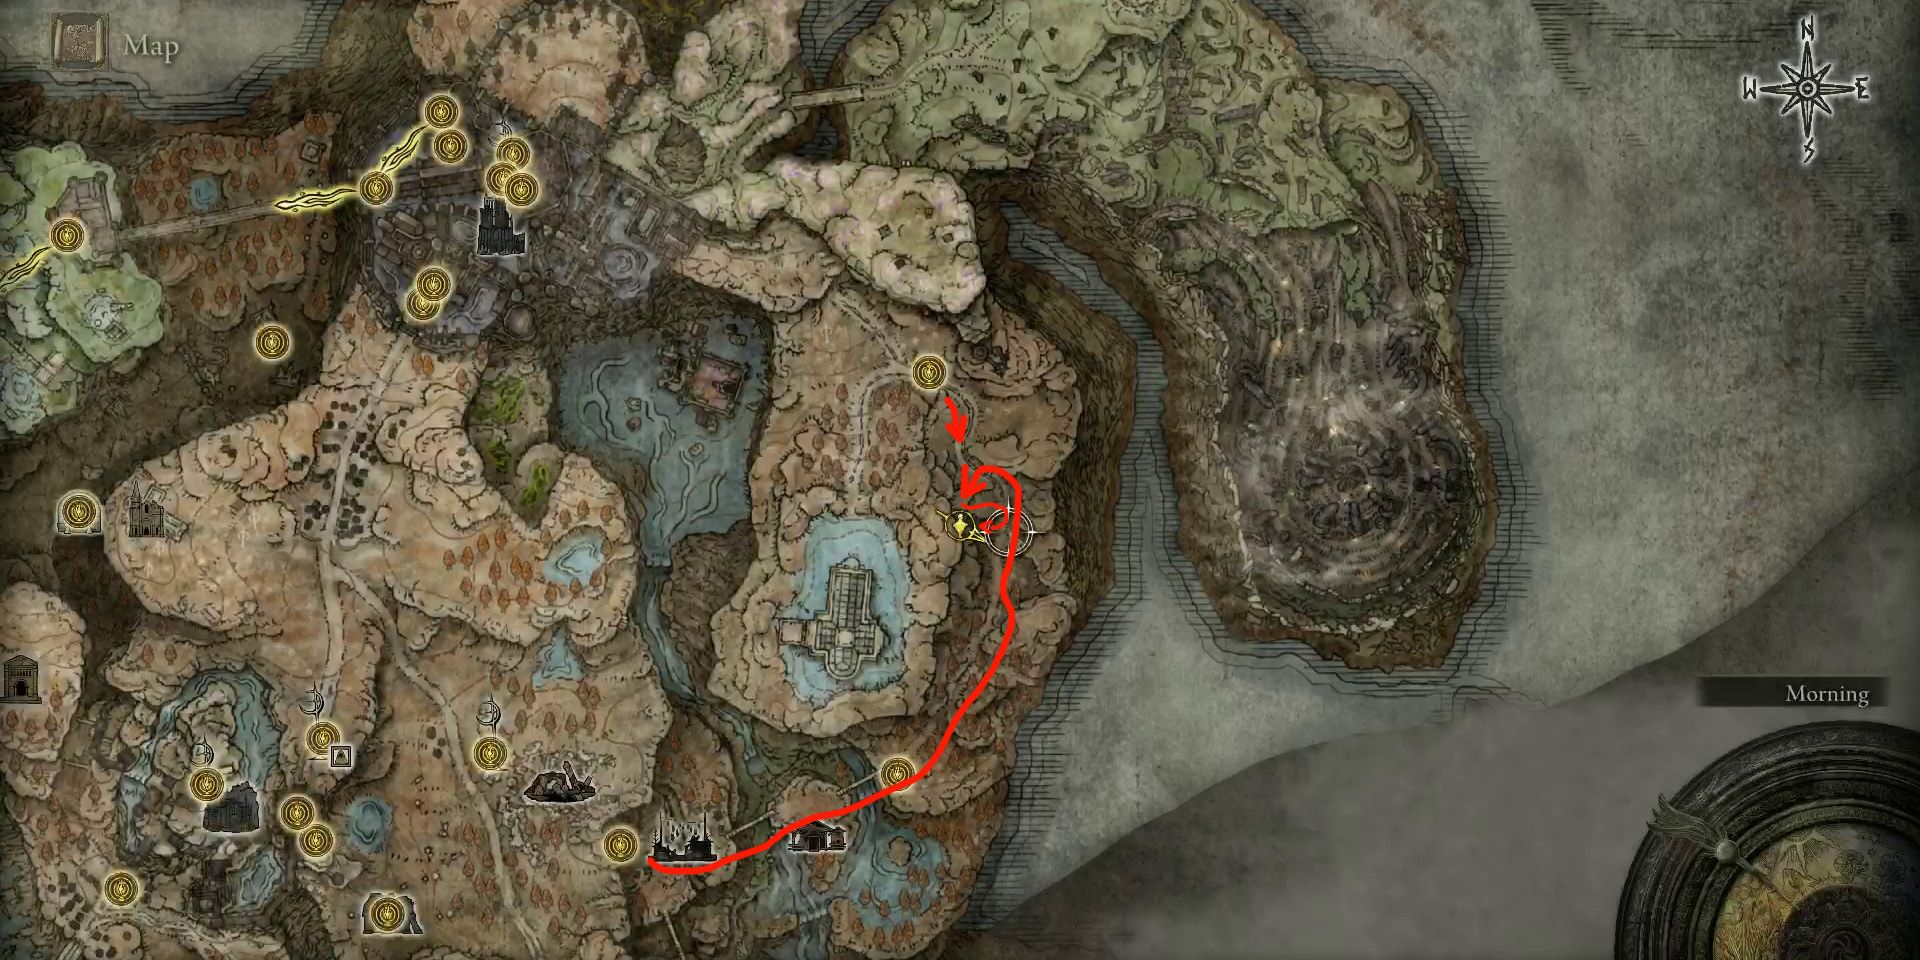 where to find the greasemonger's ball bearing in elden ring shadow of the erdtree